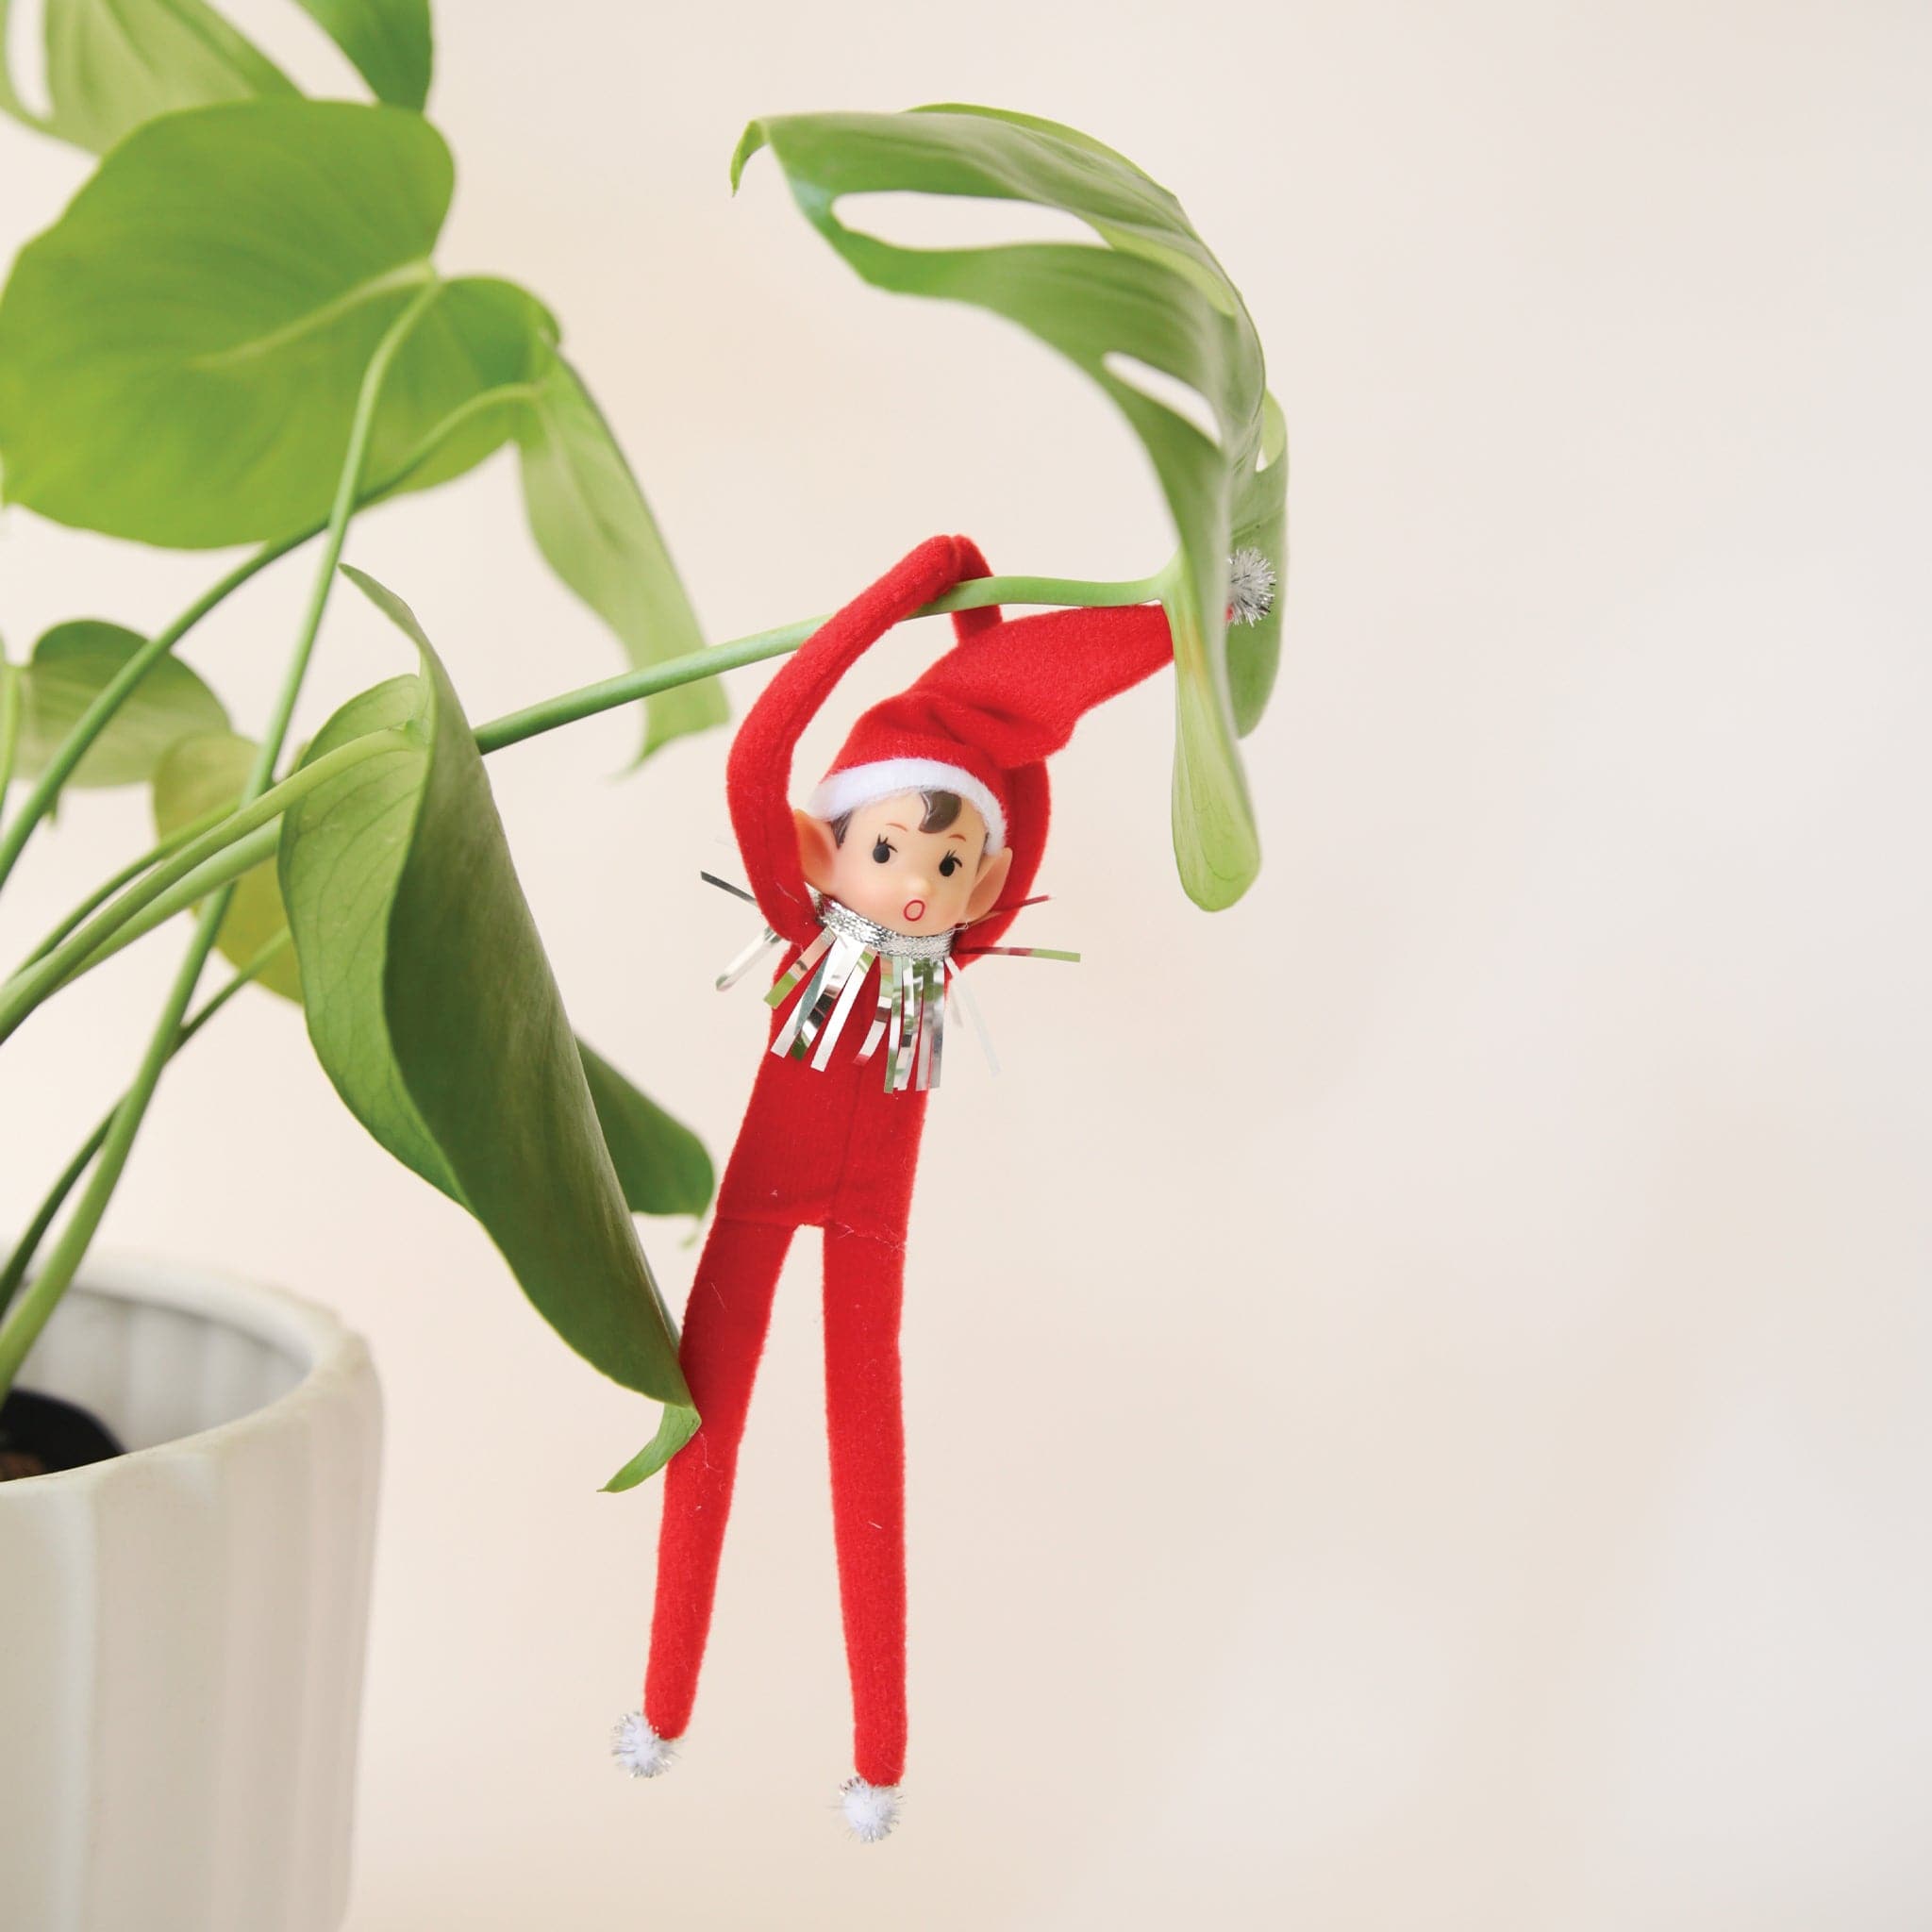 On a cream background is a red elf ornament with bendy arms and legs and a green loop for hanging and is photographed here wrapped around a green house plant.